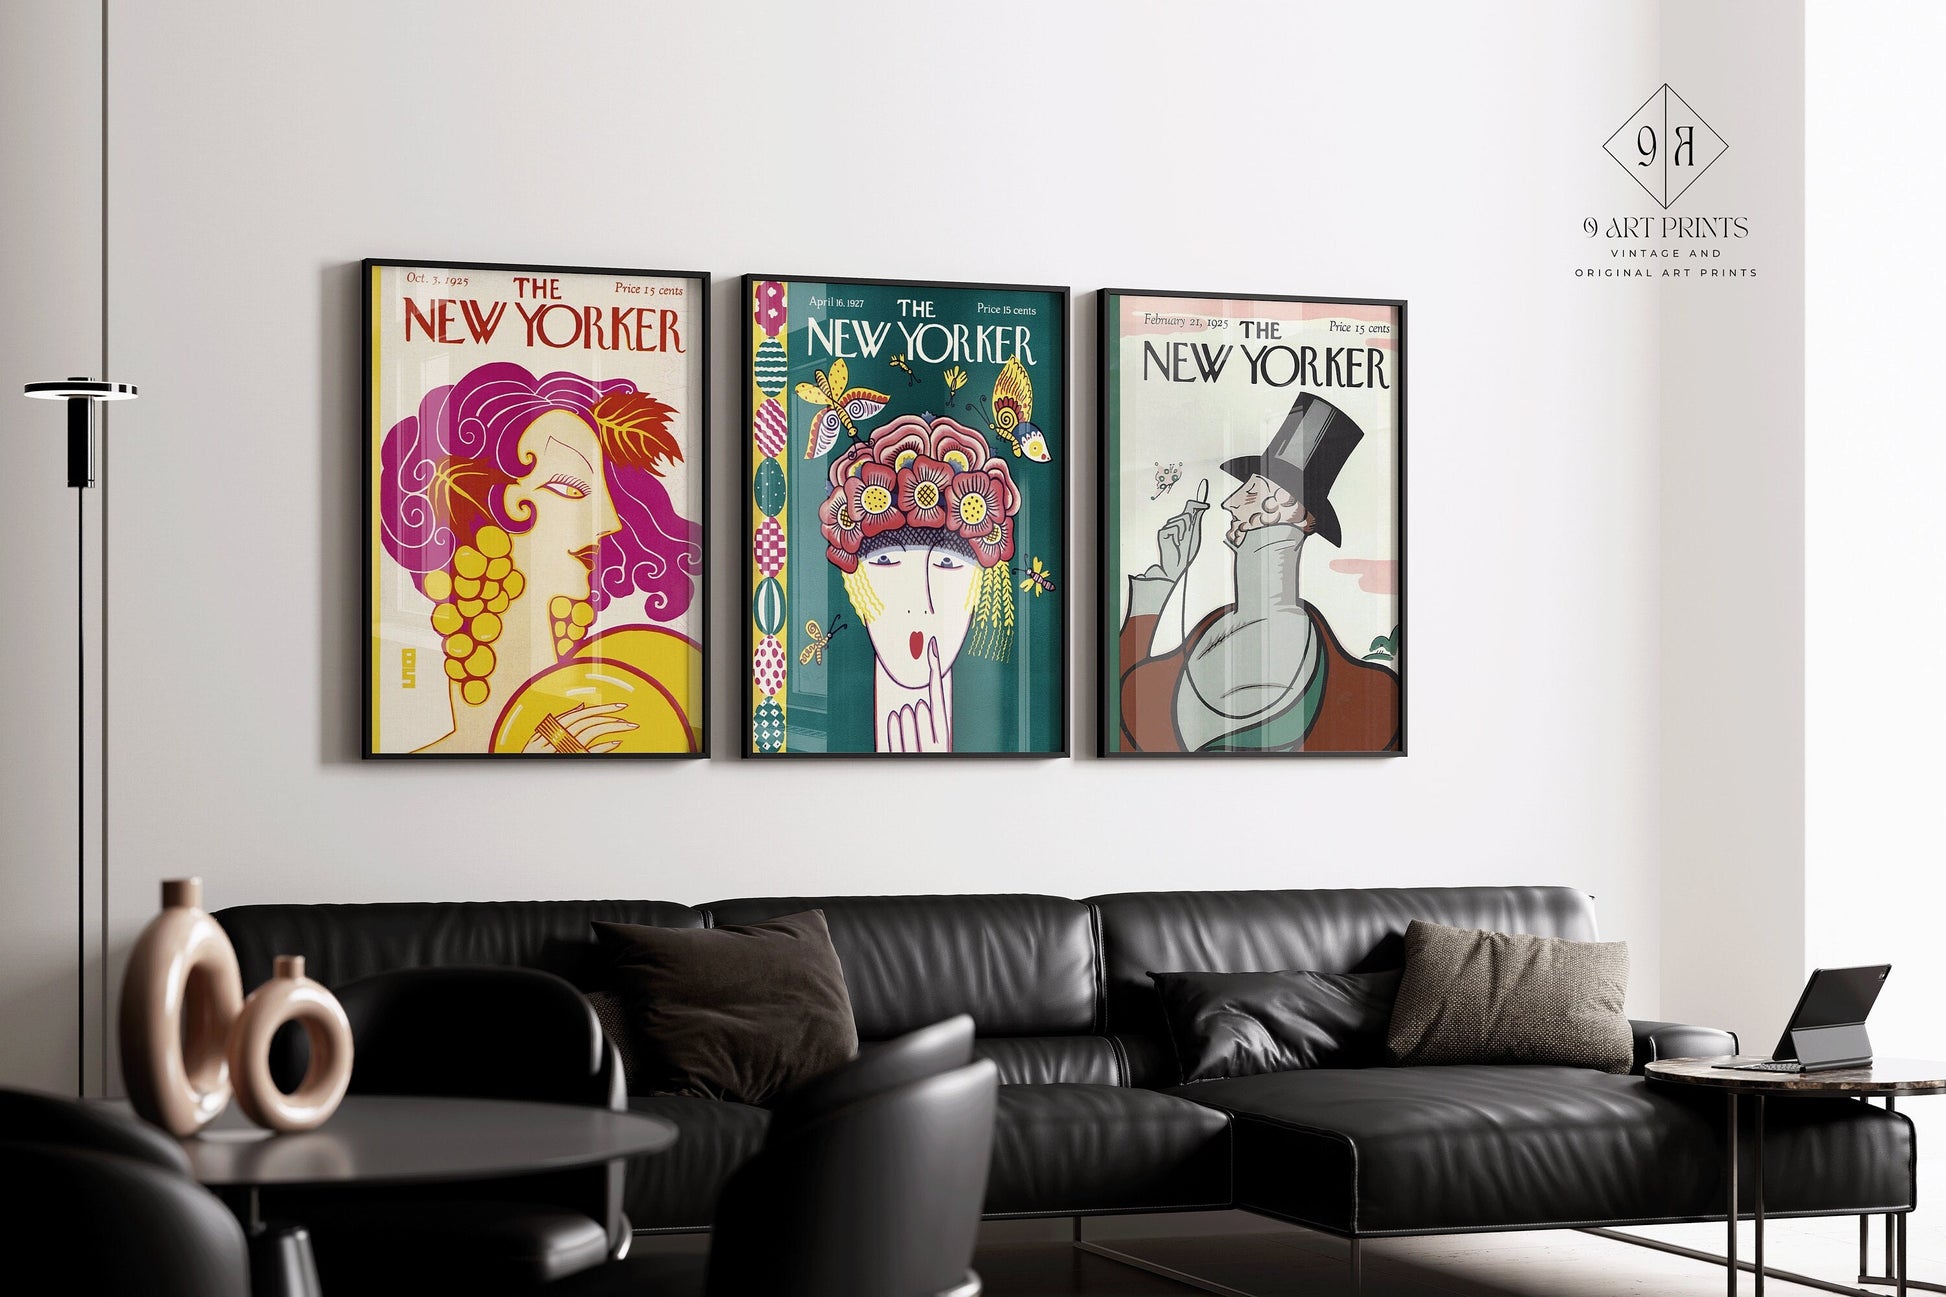 Set of 3 New Yorker Prints | Vintage Magazine Covers (available framed or unframed)